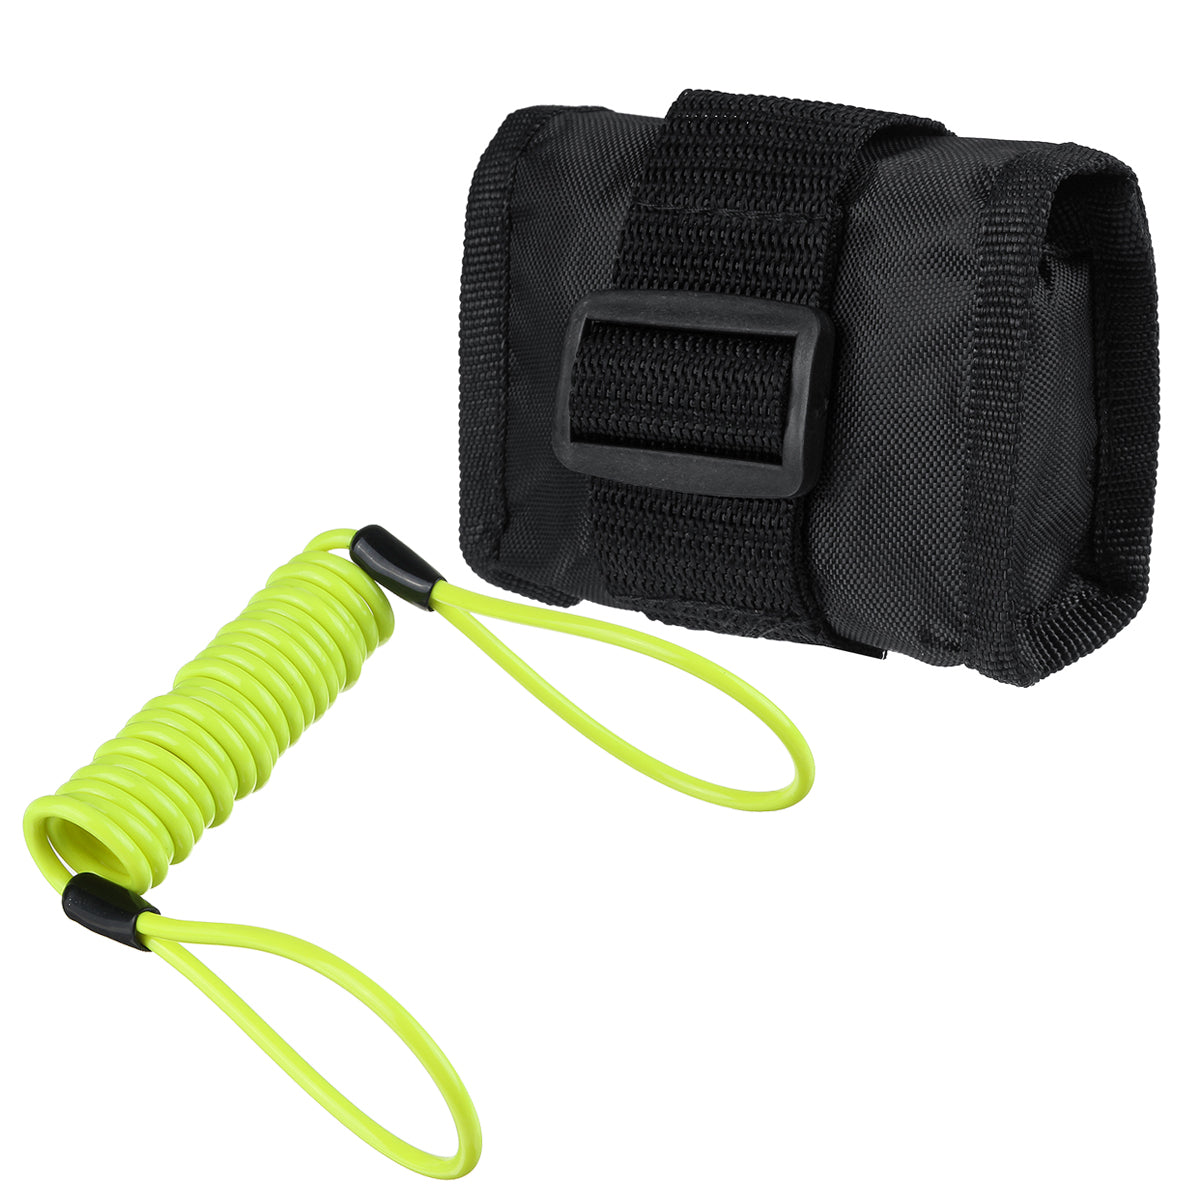 1.5m/5ft Reminder Cable With Alarm Lock Bag For Motorcycle Bike 5 Color - Auto GoShop